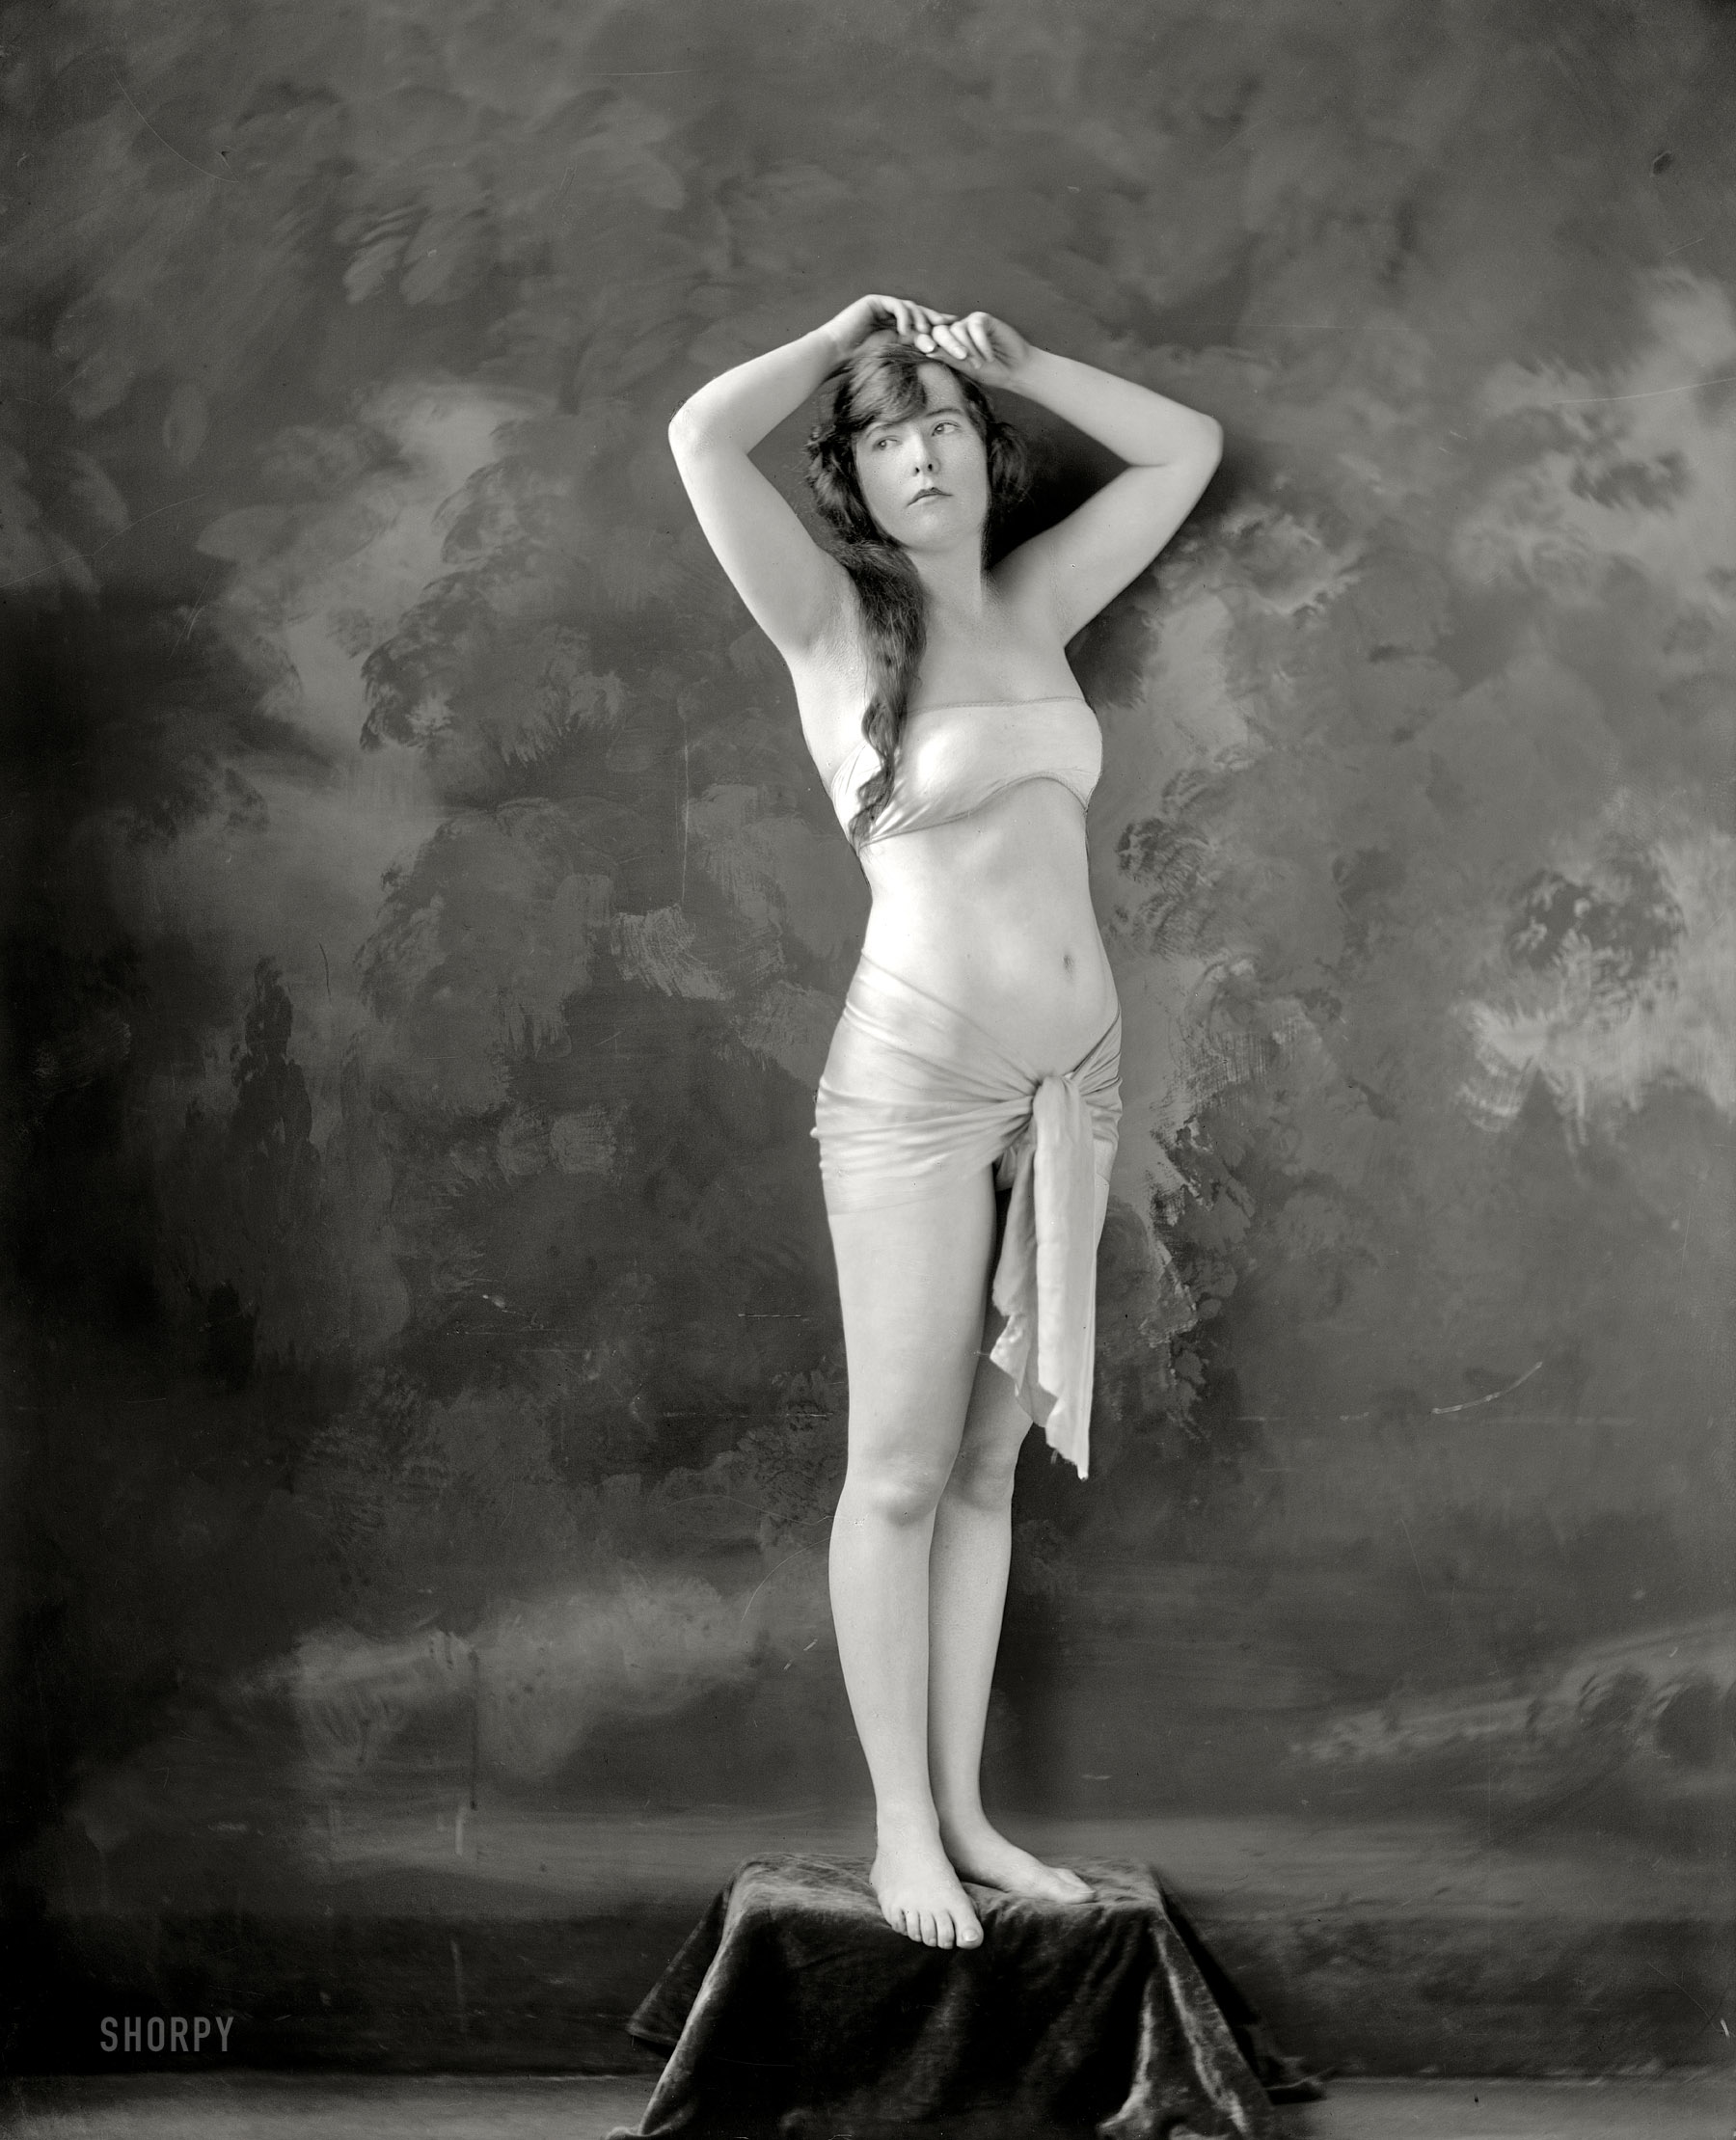 Washington, D.C., circa 1920. "Queenie Ladovitch." Possibly the daughter of Ernest (Ernst) Vladimir Ladovitch, president of the Washington Conservatory of Music. Harris & Ewing Collection glass negative. View full size.